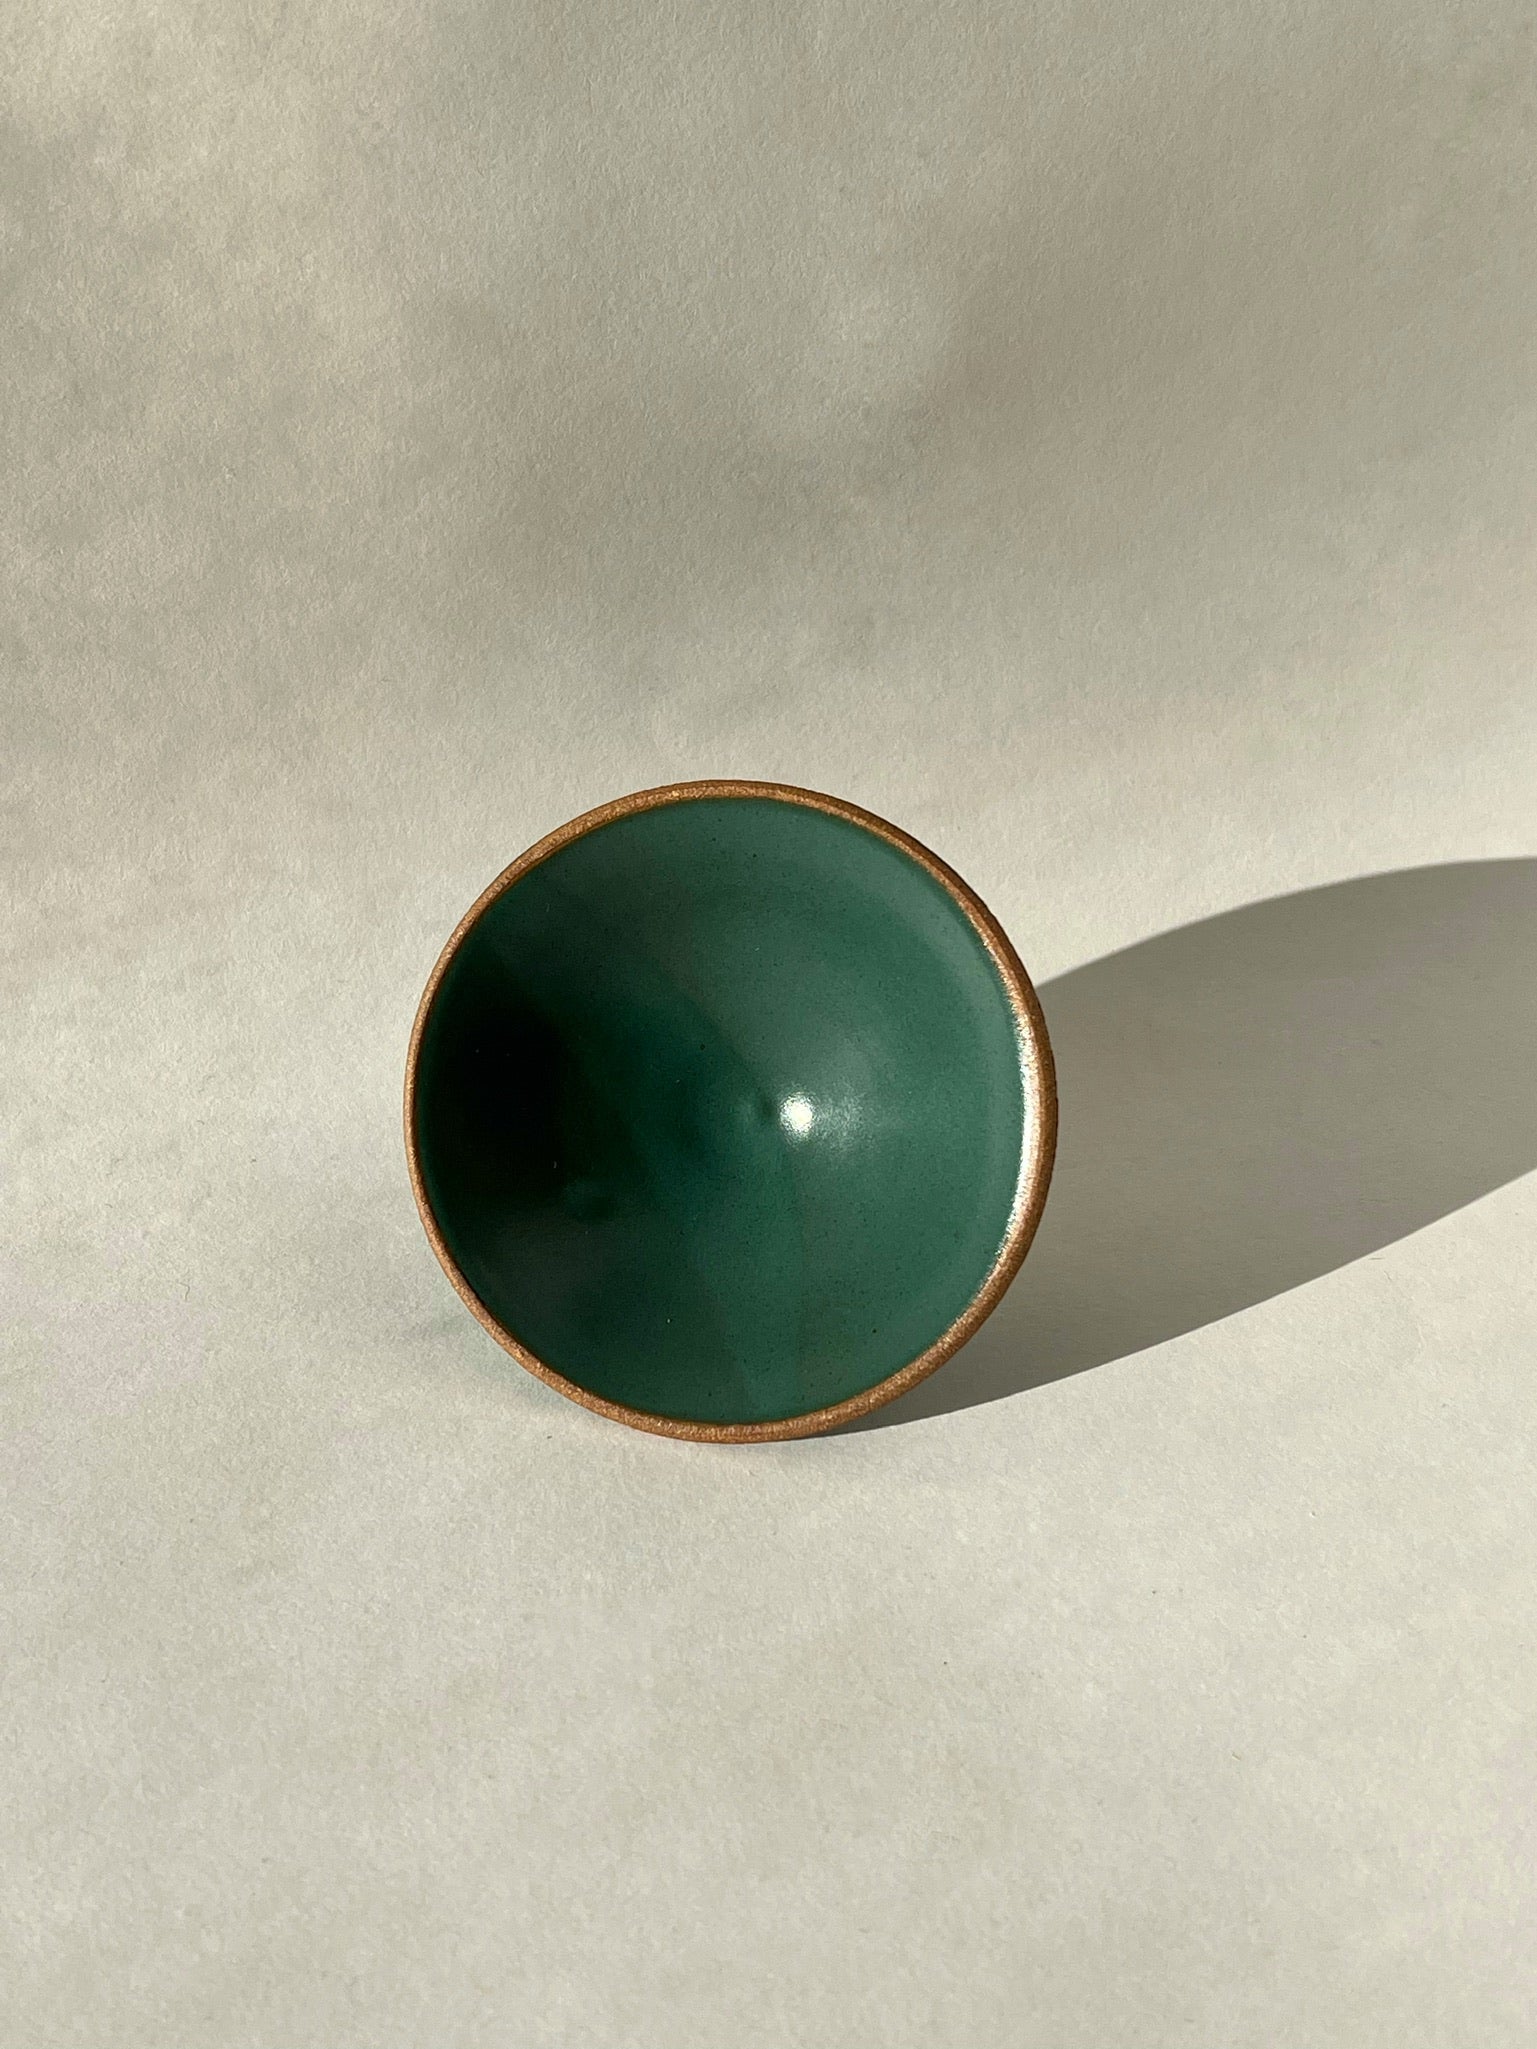 Lifeware for Na Nin Ceramic Incense Dish / Available in Evergreen